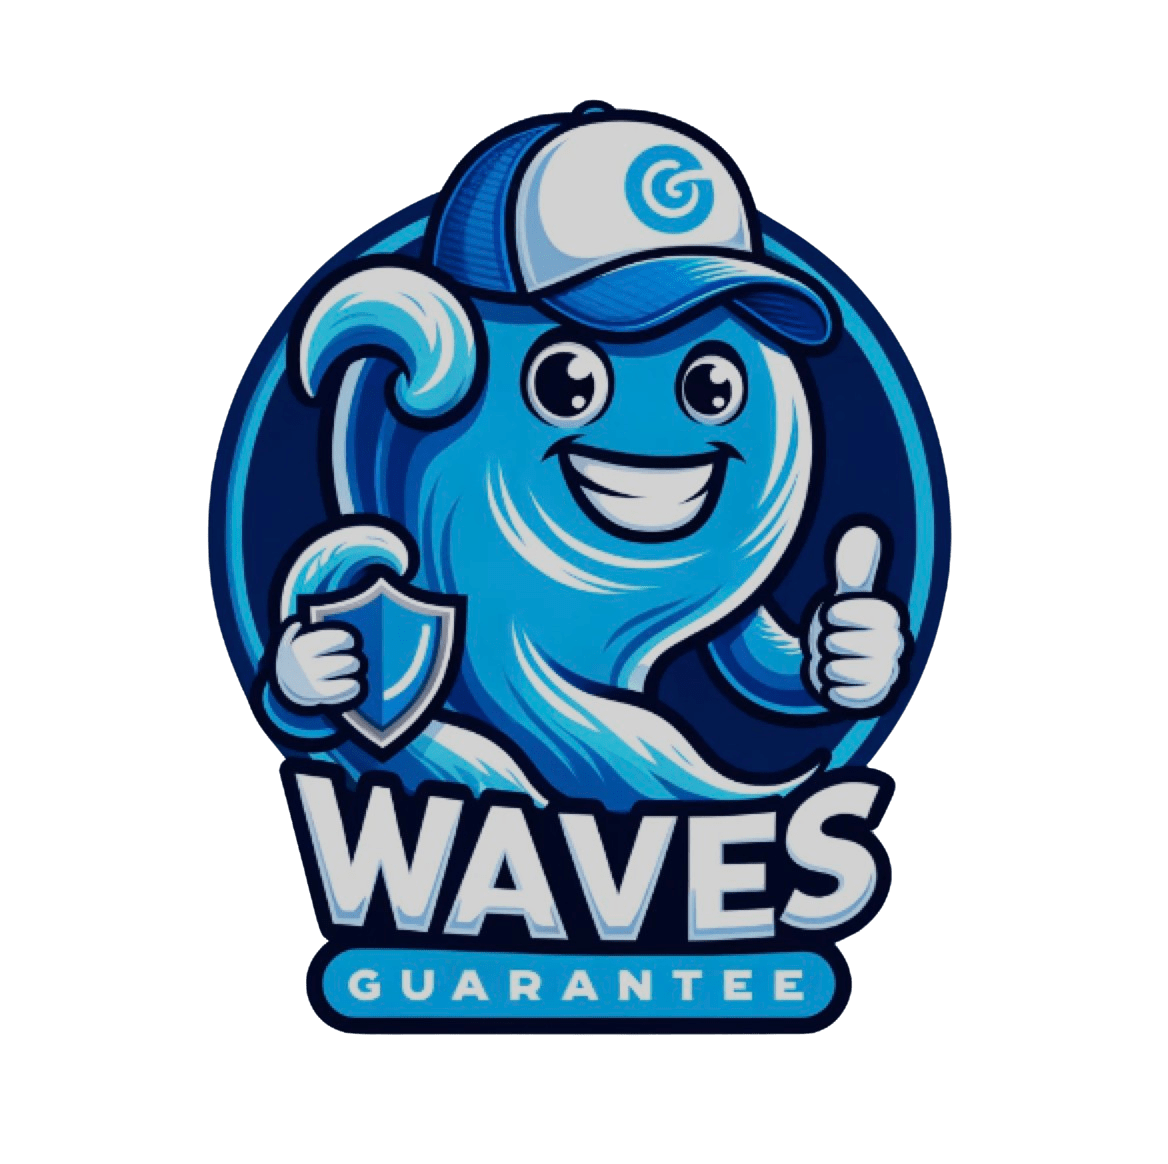 Waves pest control guarantee, featuring a smiling blue wave character with a 'g' cap, giving a thumbs up and holding a shield that reads 'waves guarantee' for trusted pest control service.